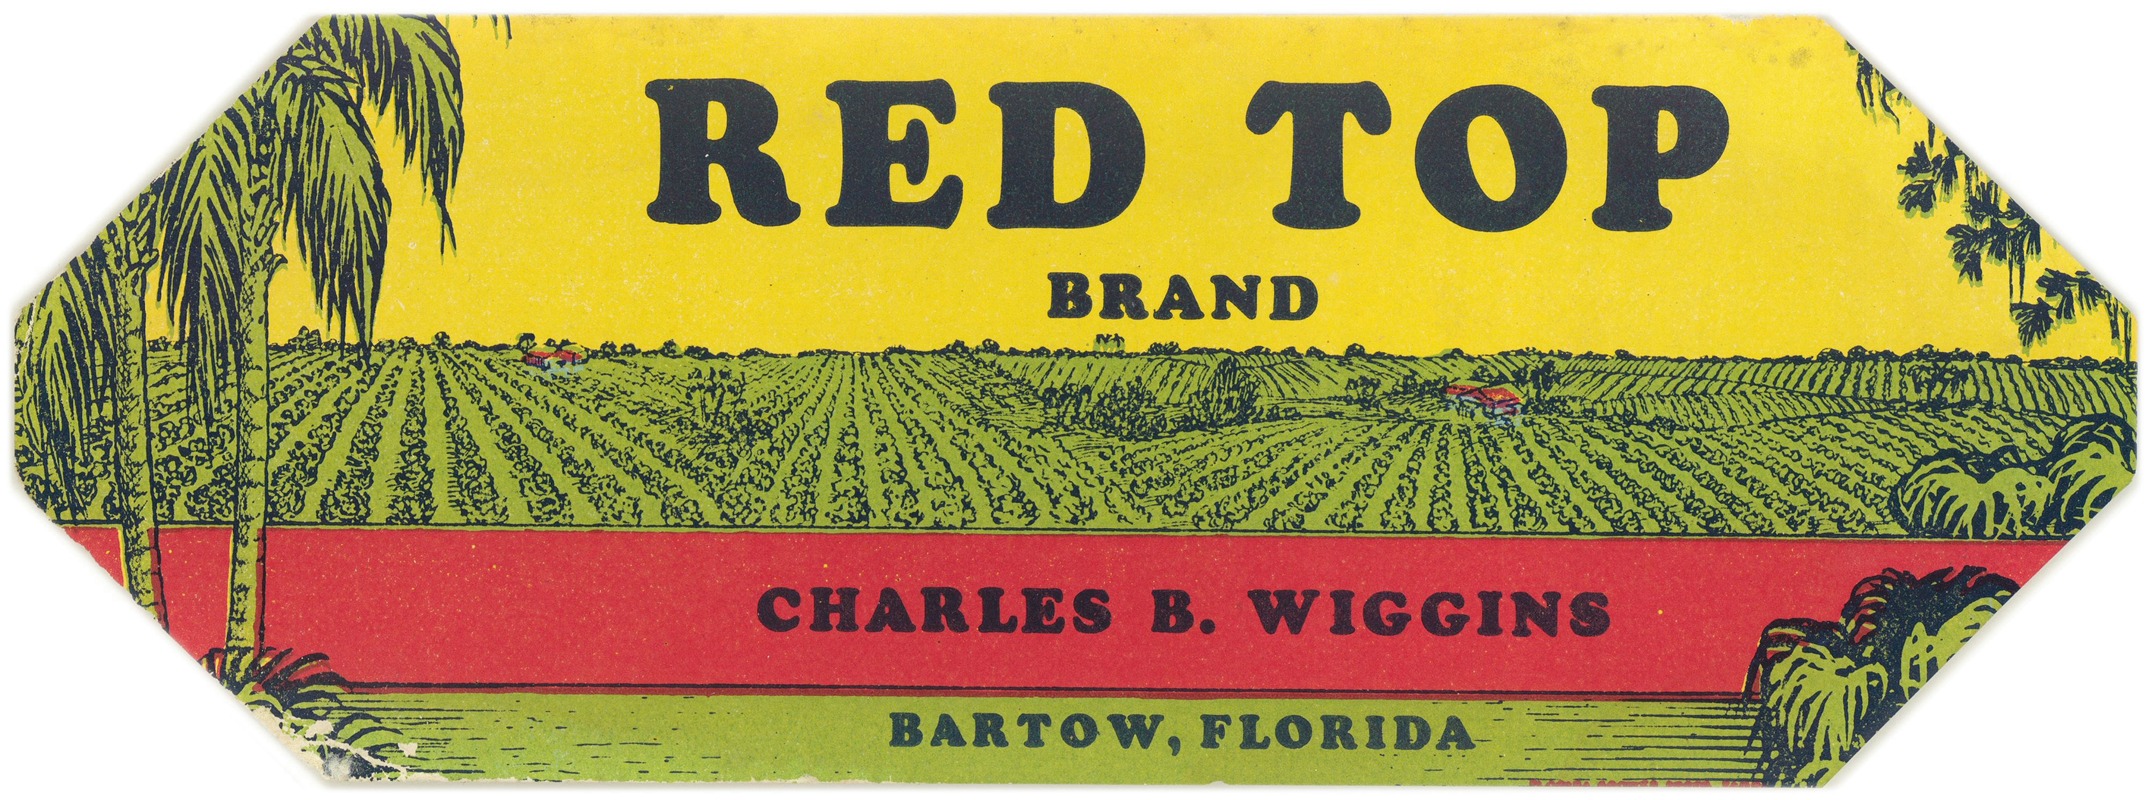 Anonymous - Red Top Brand Produce Label